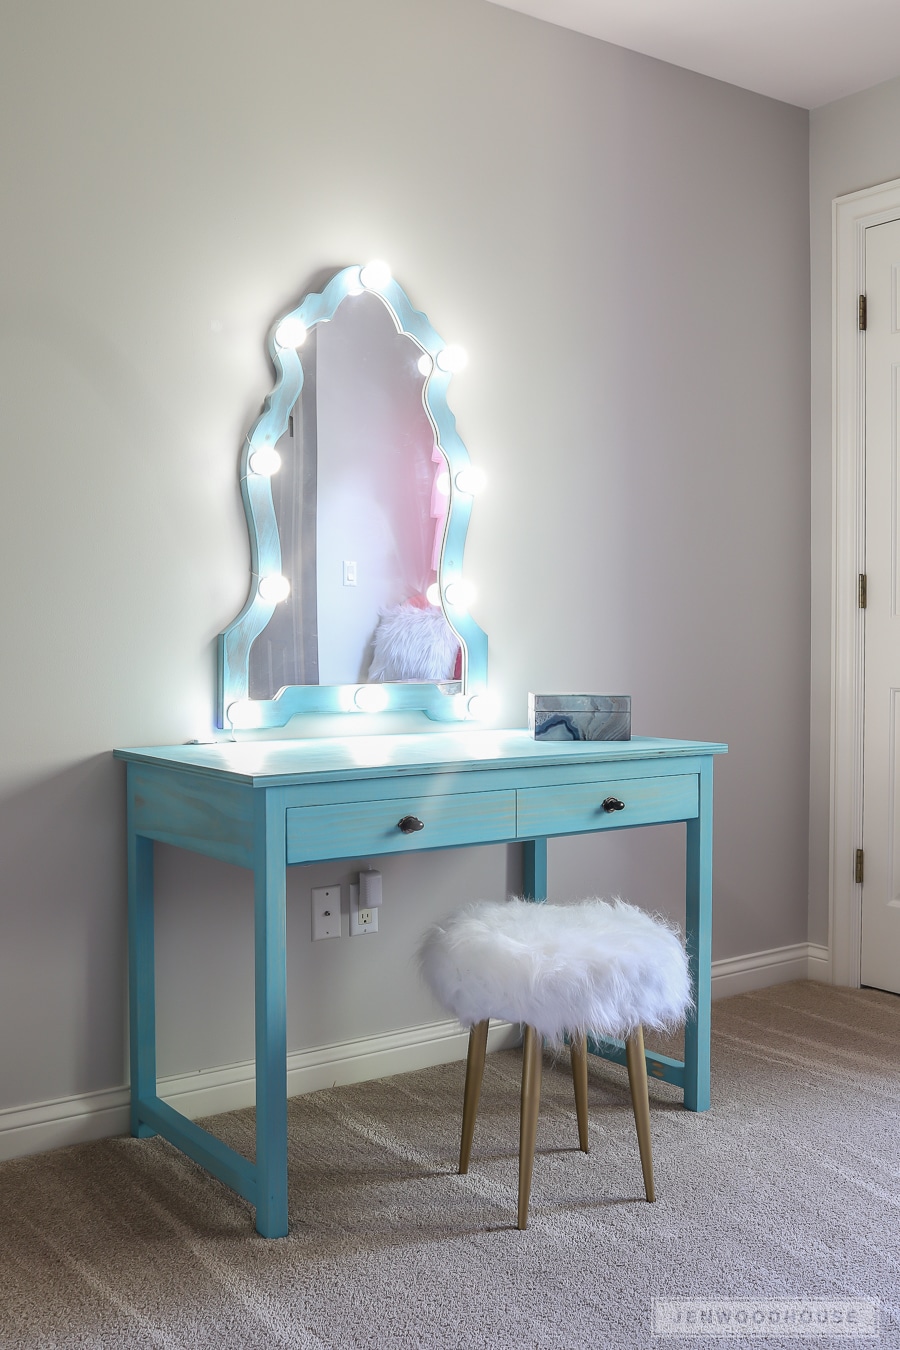 How To Build A Diy Makeup Vanity With, Where Can I Find A Makeup Vanity